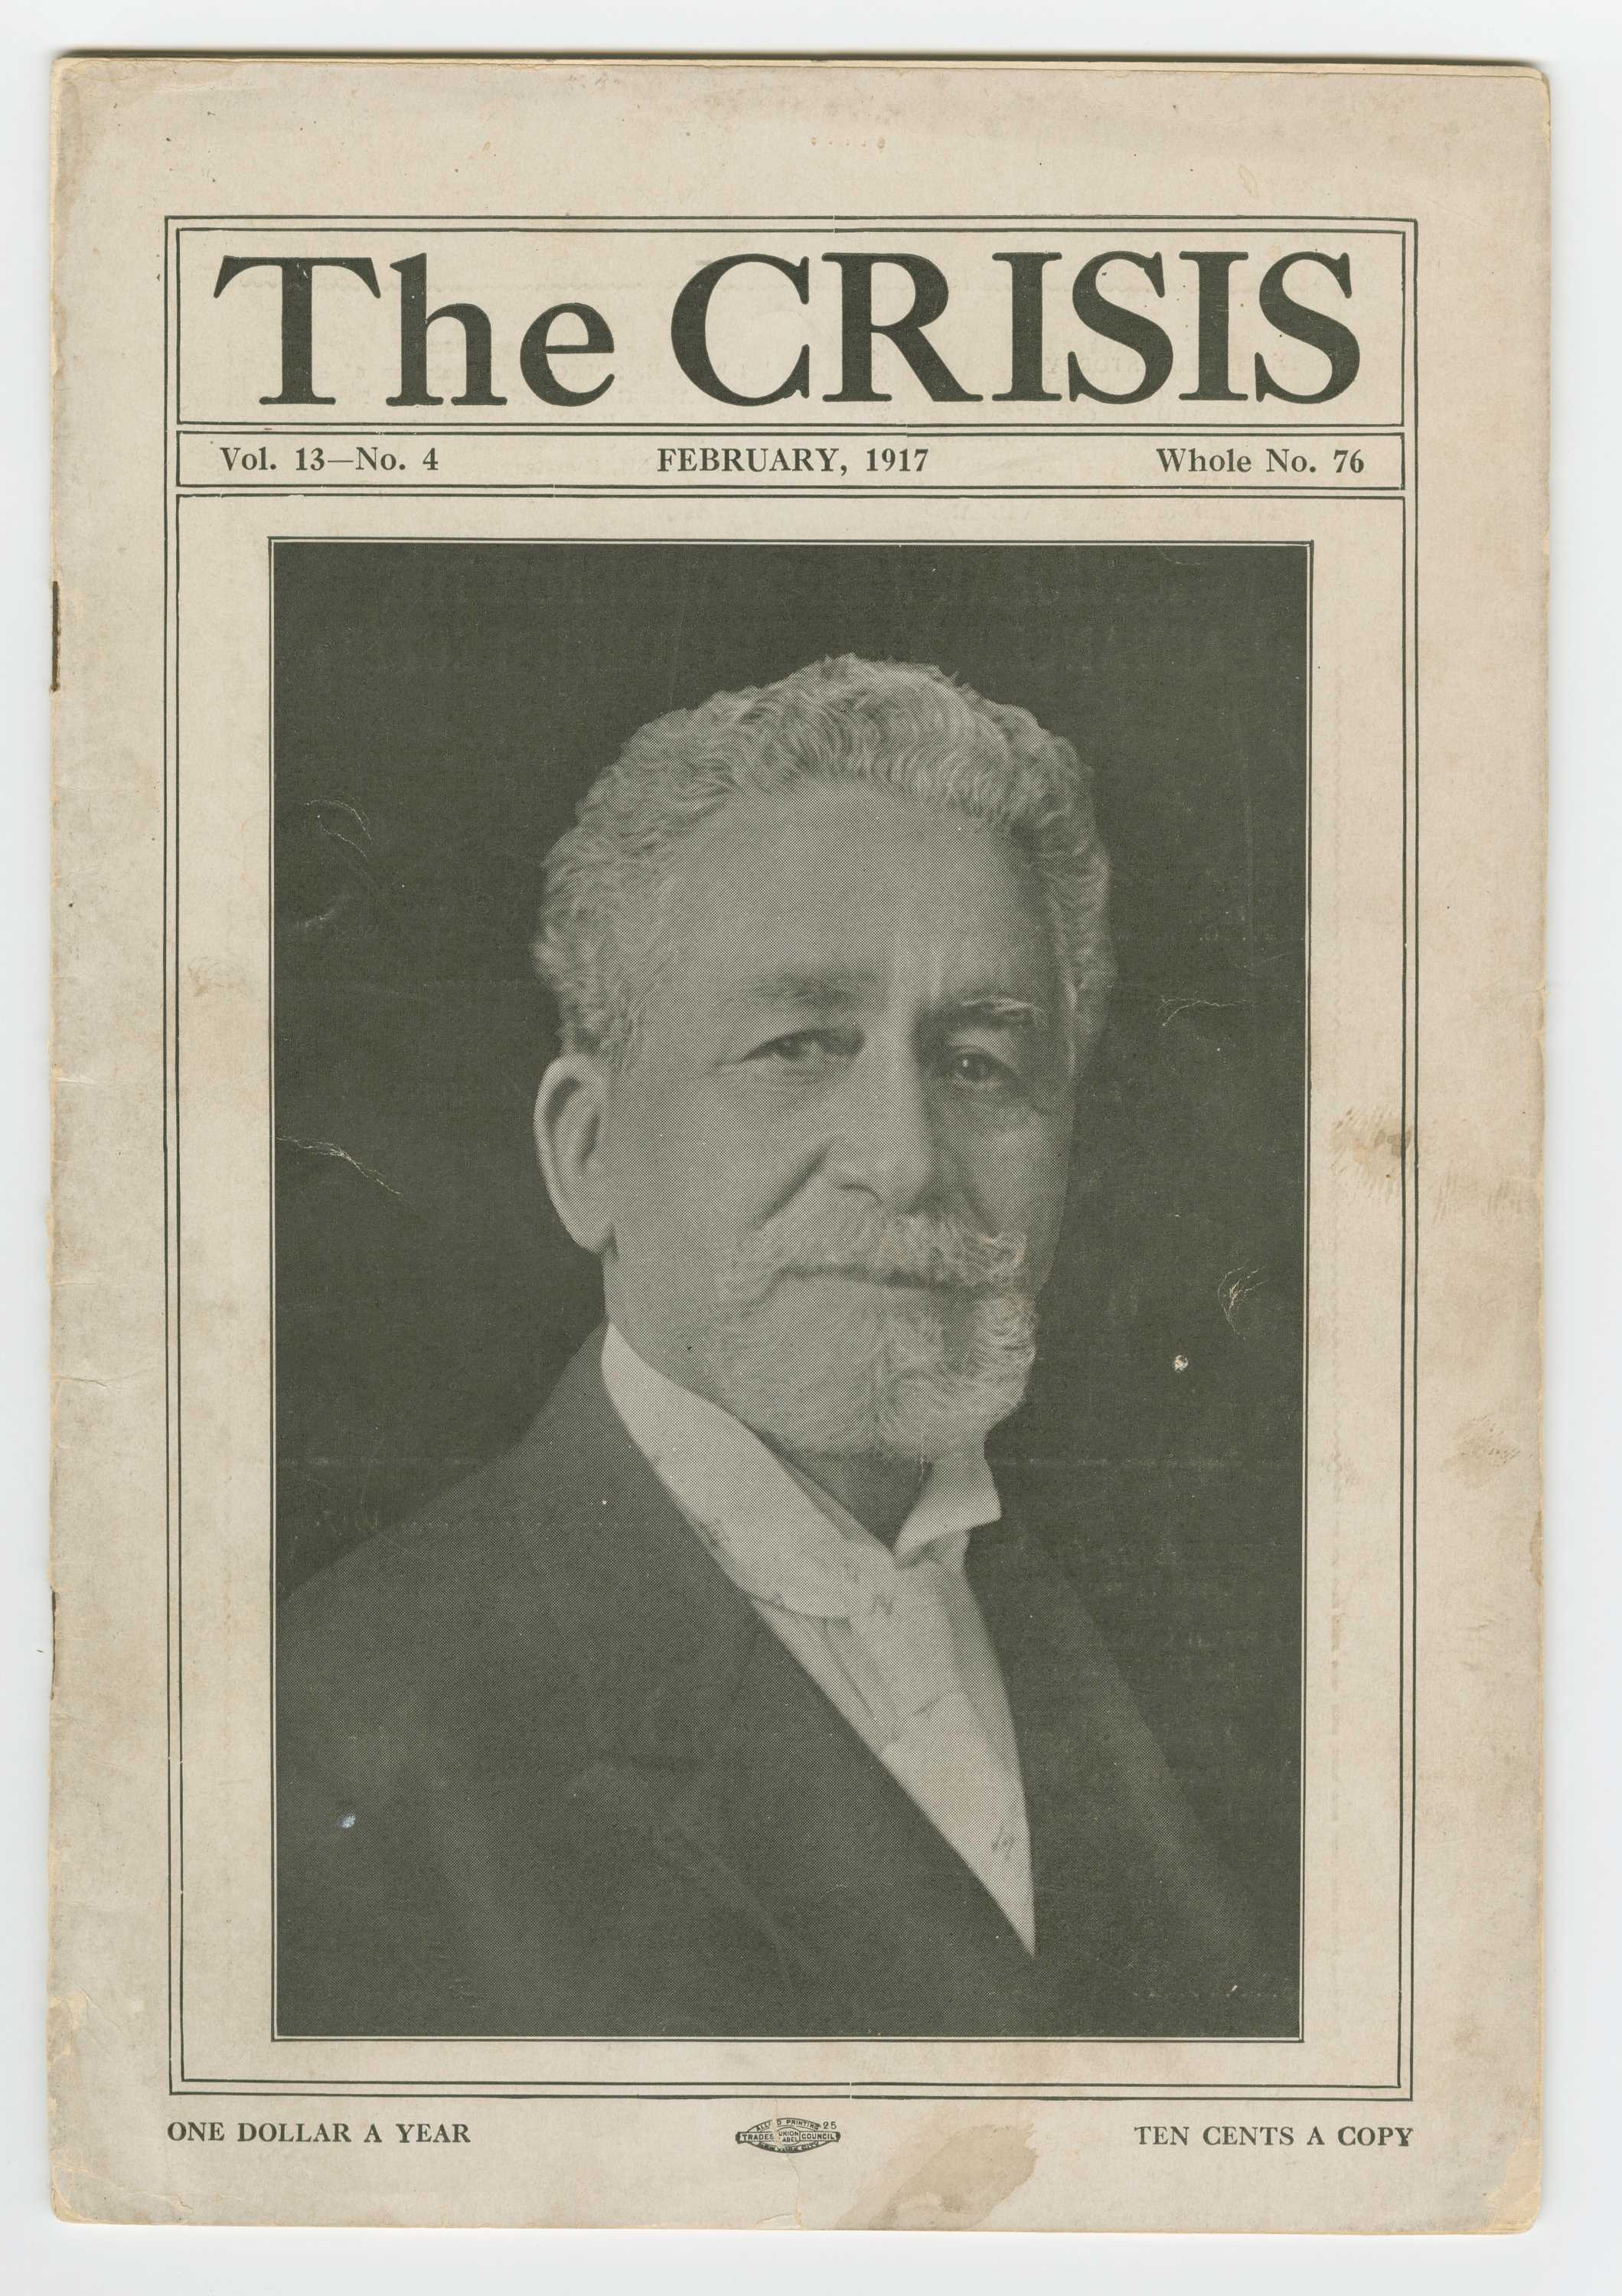 The February 1917 (Vol. 13 No. 4) issue of The Crisis.